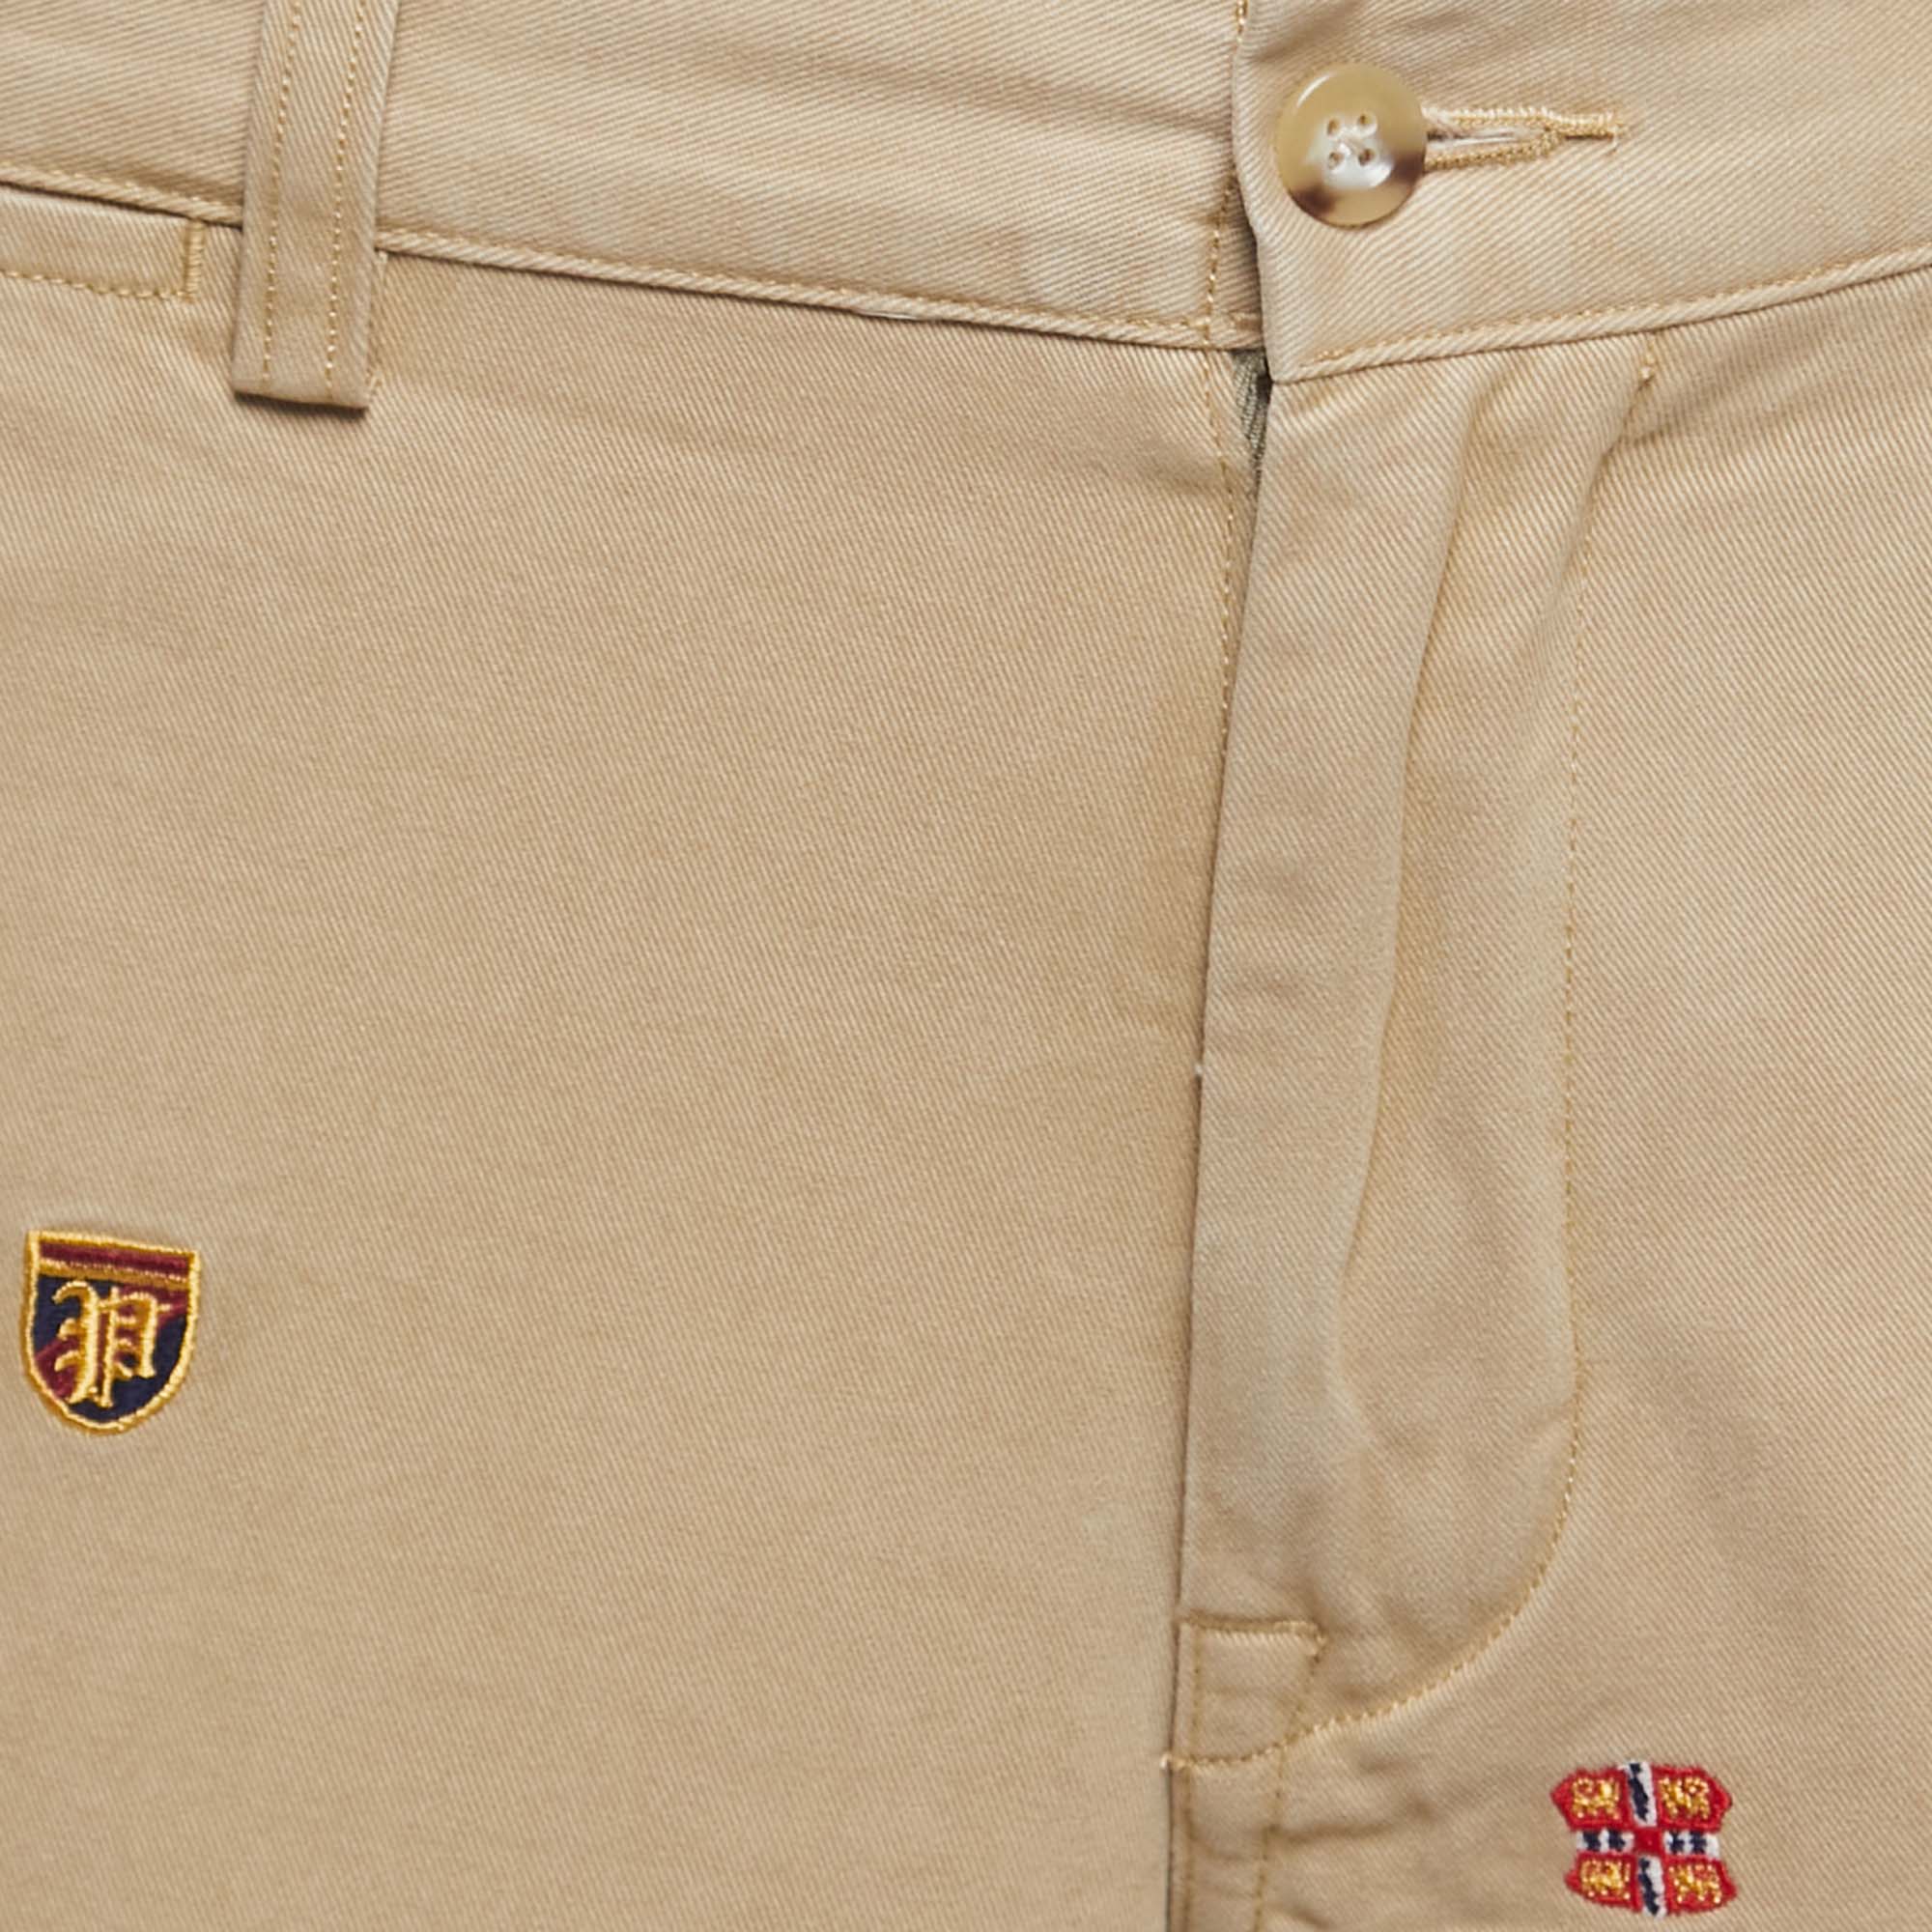 Polo Ralph Lauren Beige Crest Embroidered Cotton Trousers L